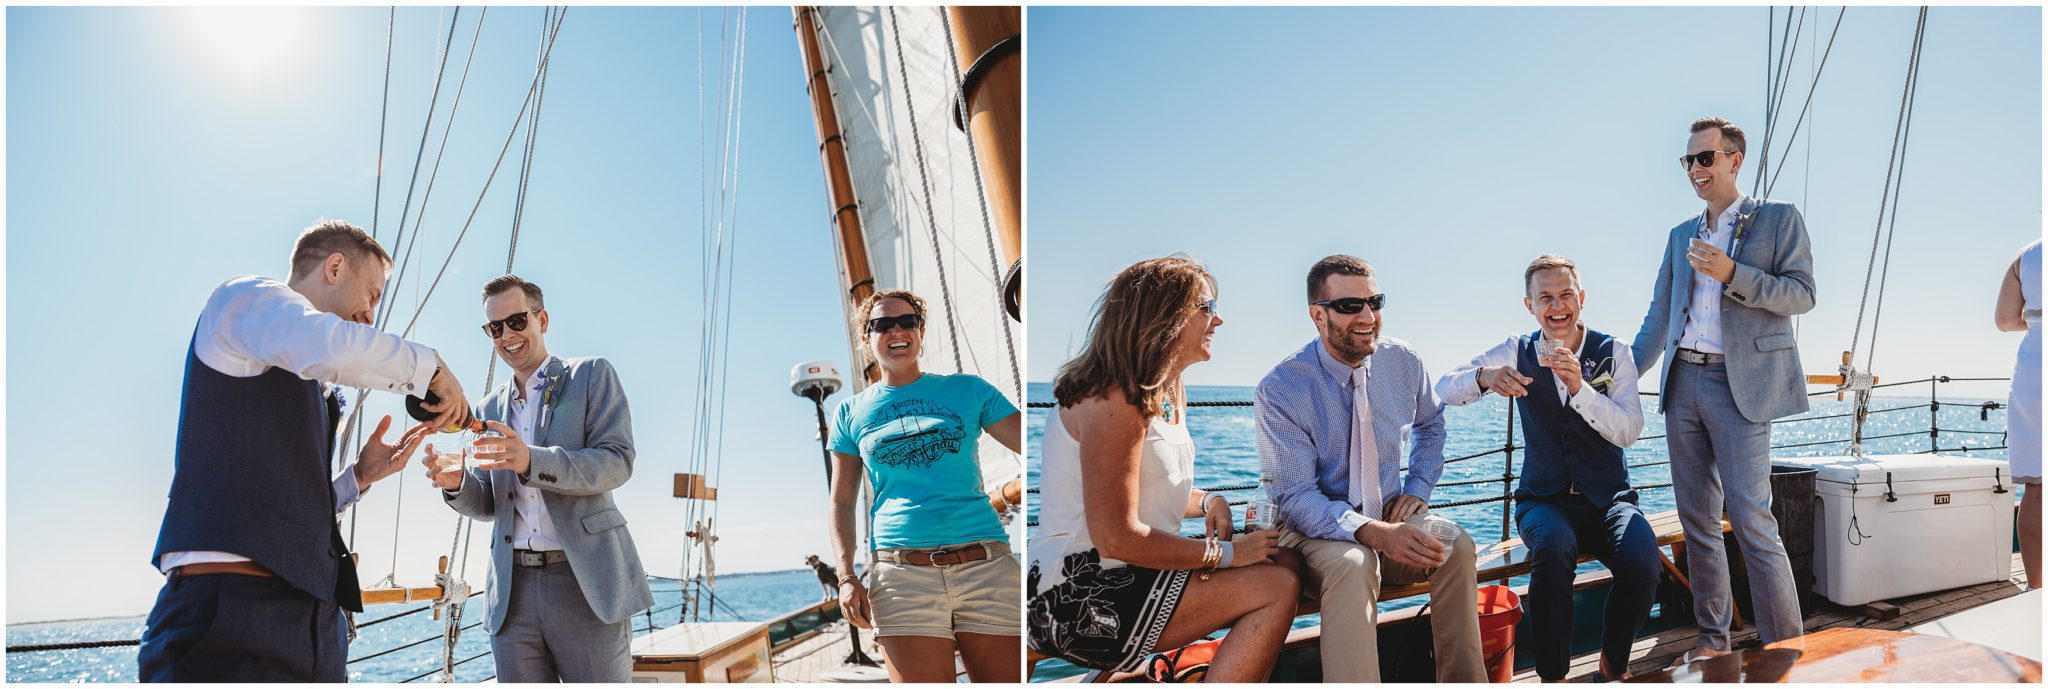 popping champagne while sailing - destination wedding photography